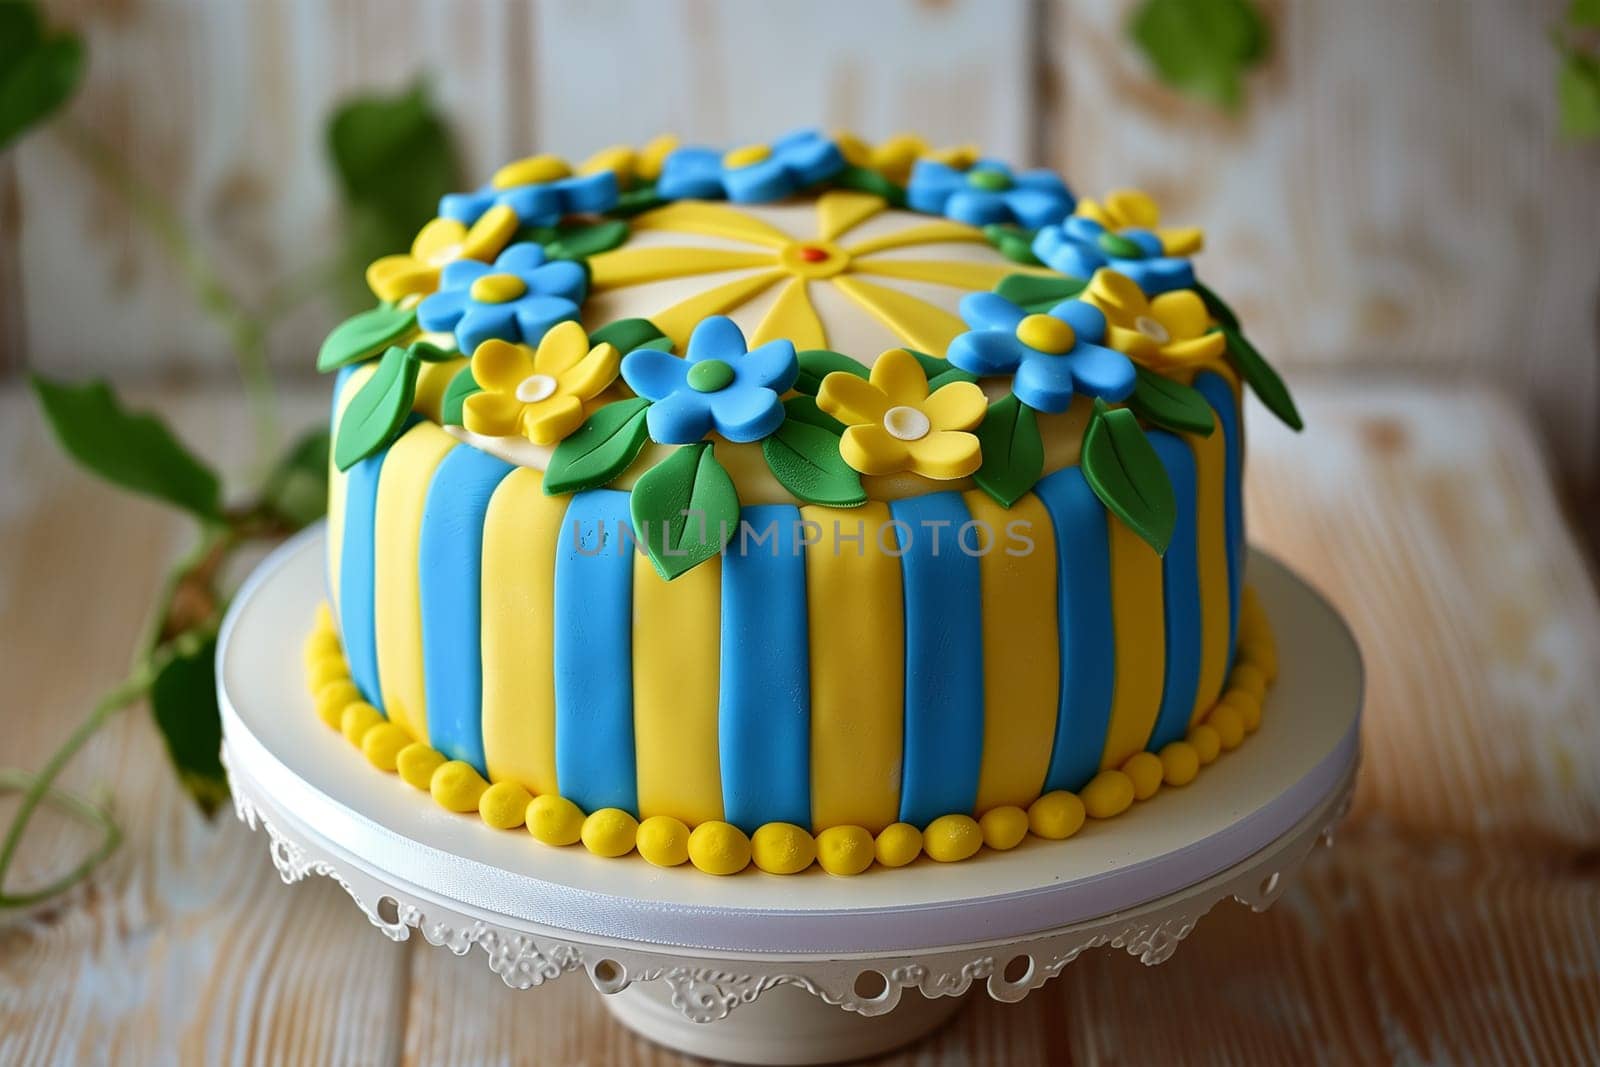 A festive cake decorated with blue and yellow stripes and topped with colorful flowers, perfect for celebrating Swedish National Day.